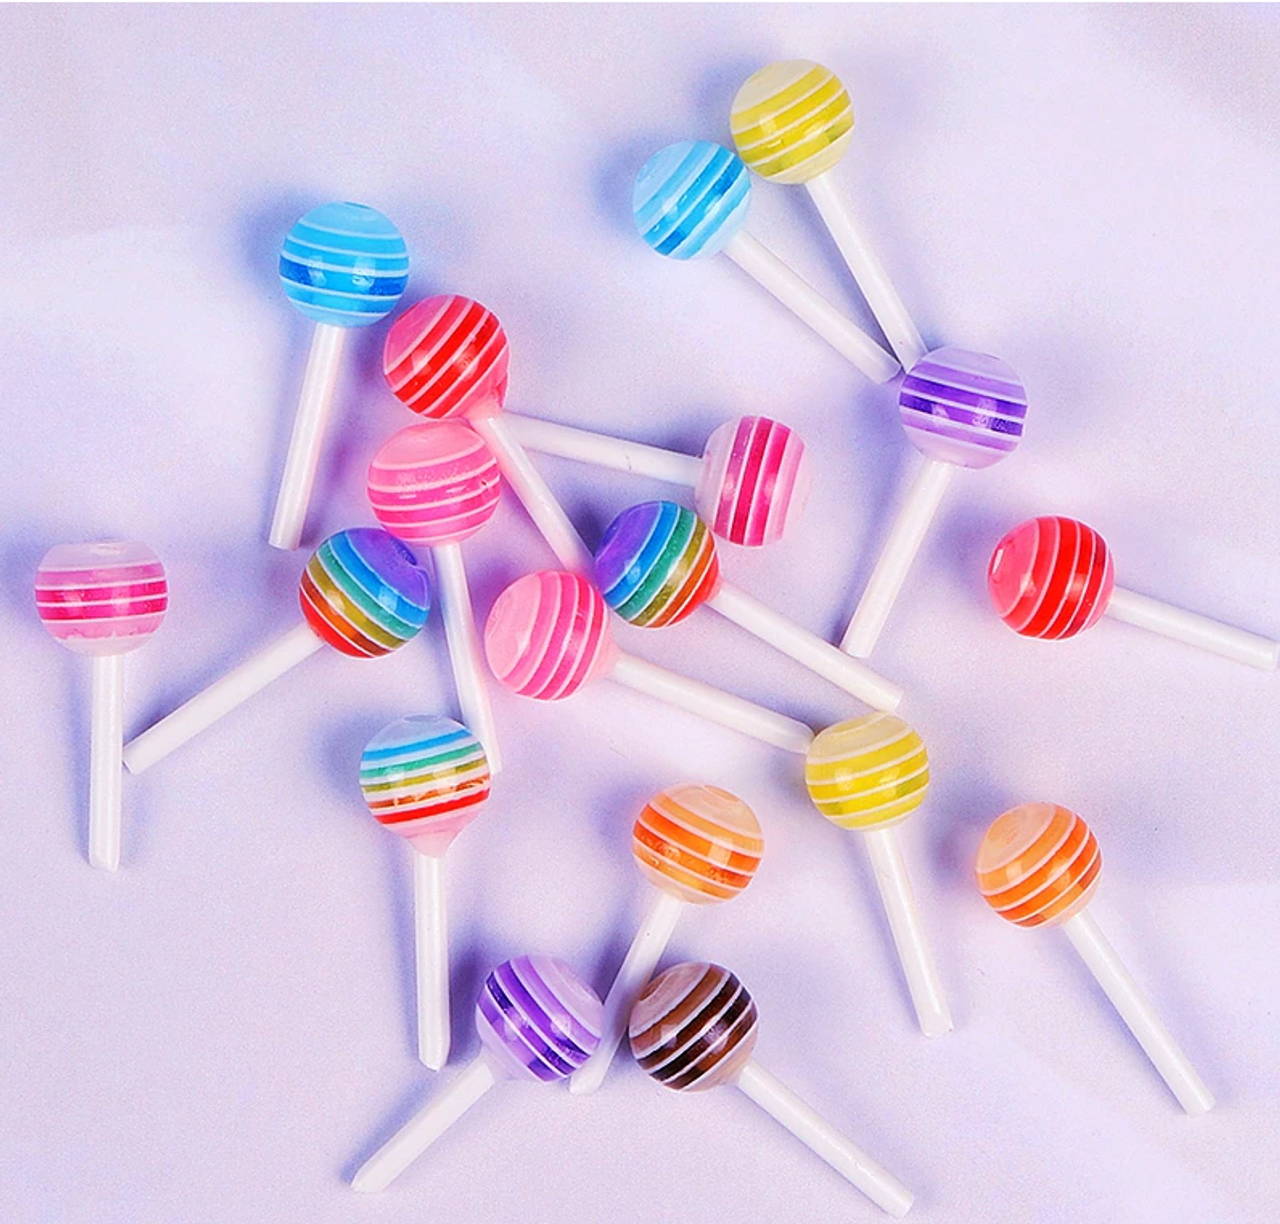 1Bag Mixed Resin Nail Art Charms Sweet Lollipops/Candy